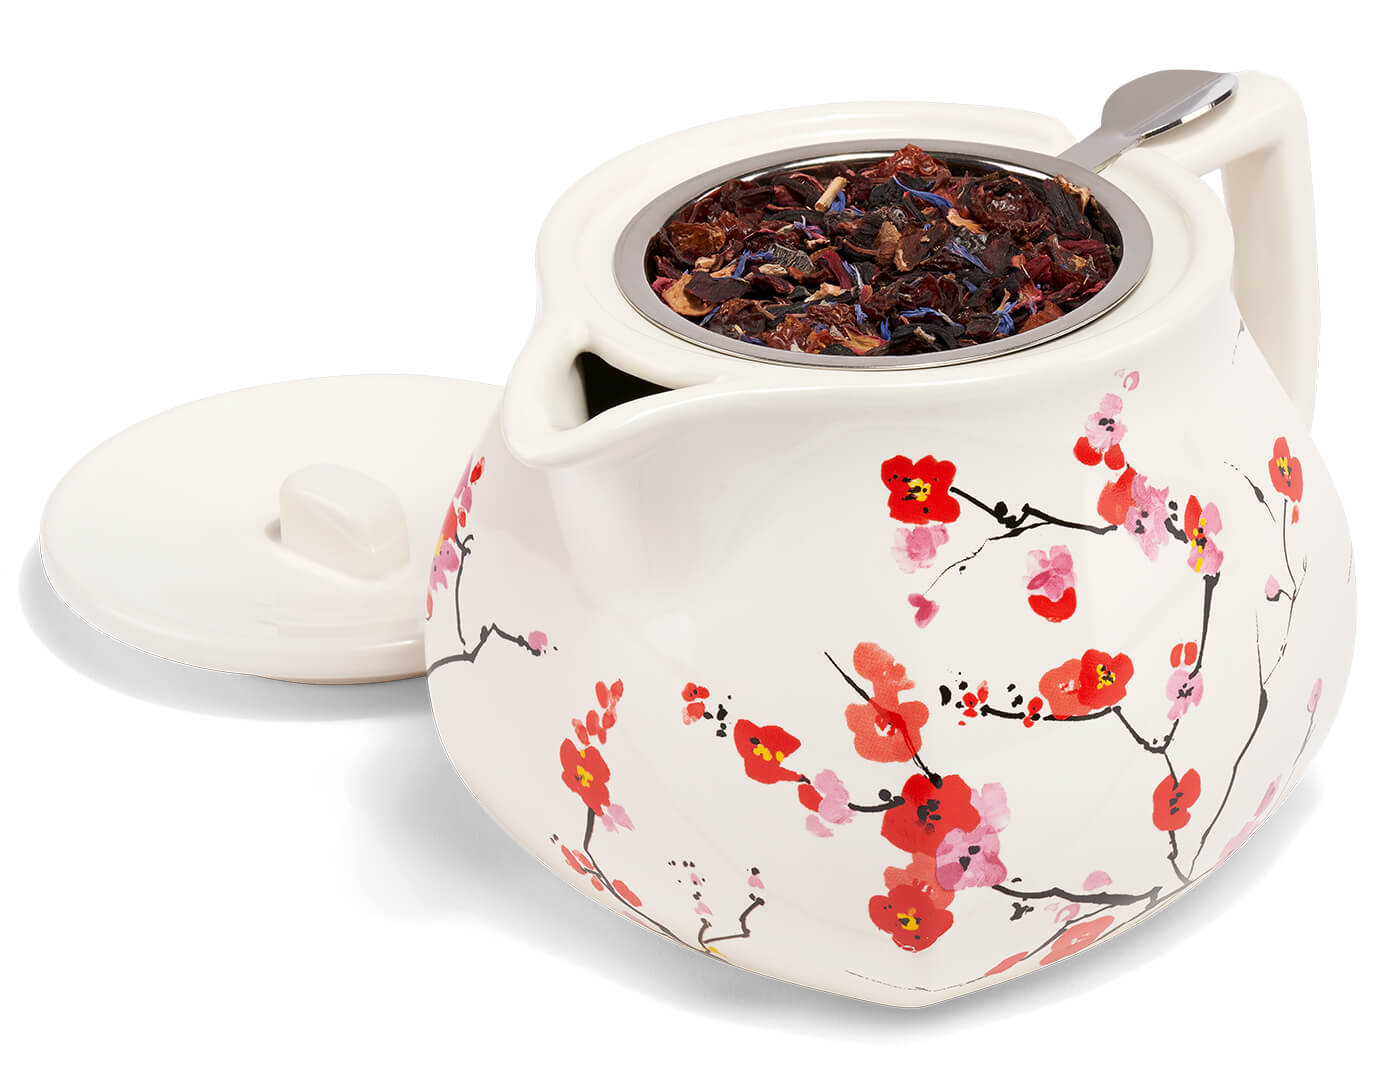 Fiore Sakura Teapot with lid on table and loose tea inside the infuser basket